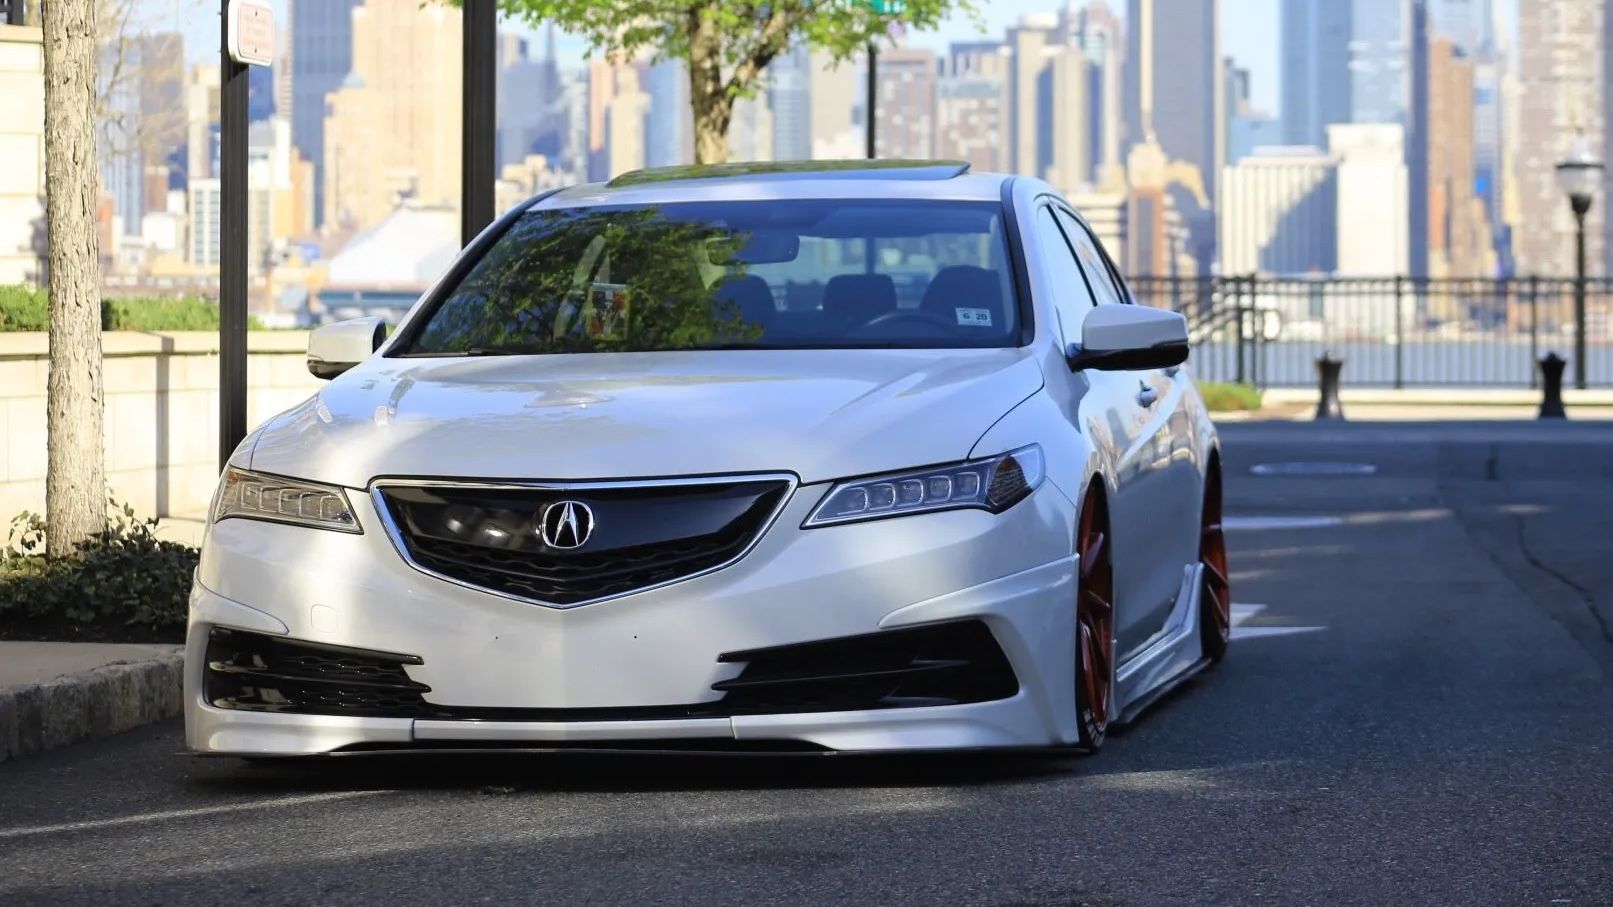 Acura Service and Repairs at ﻿Guy's Automotive﻿ in ﻿North Tampa and Tampa, FL﻿